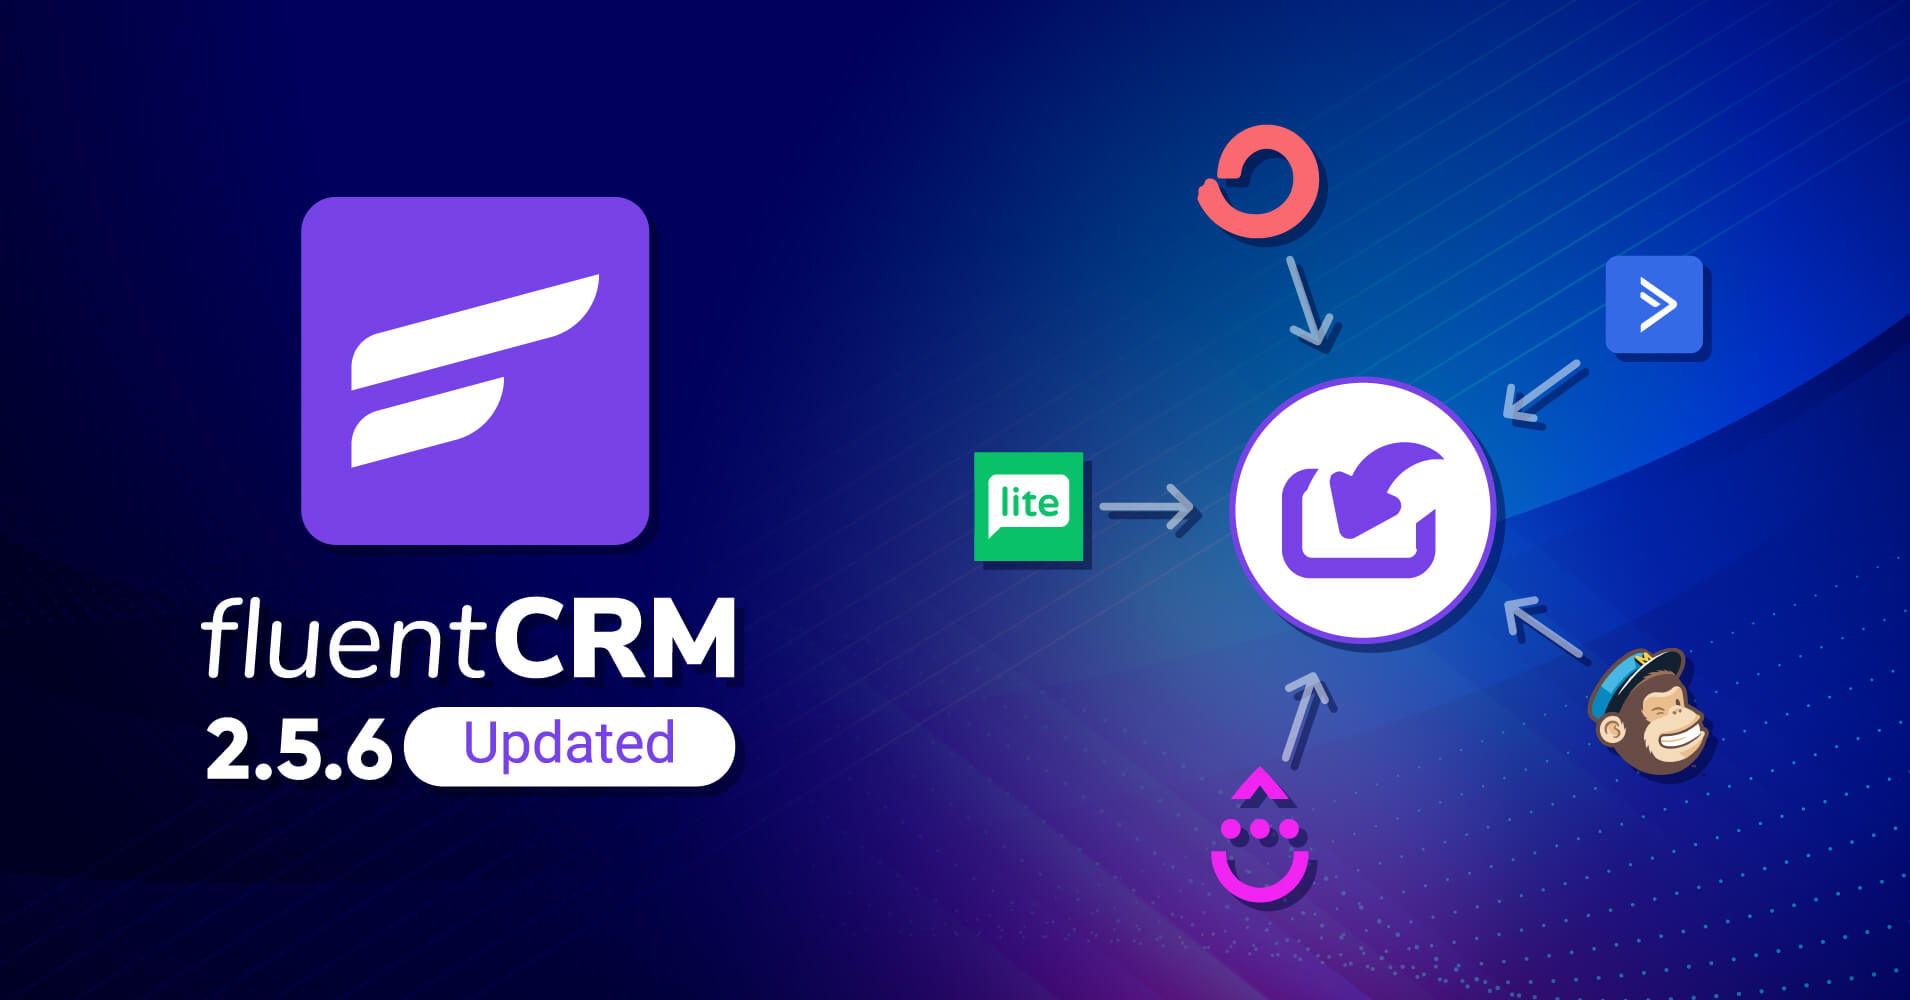 FluentCRM 2.5.6: Introducing An Easier Way of Migrating to FluentCRM!